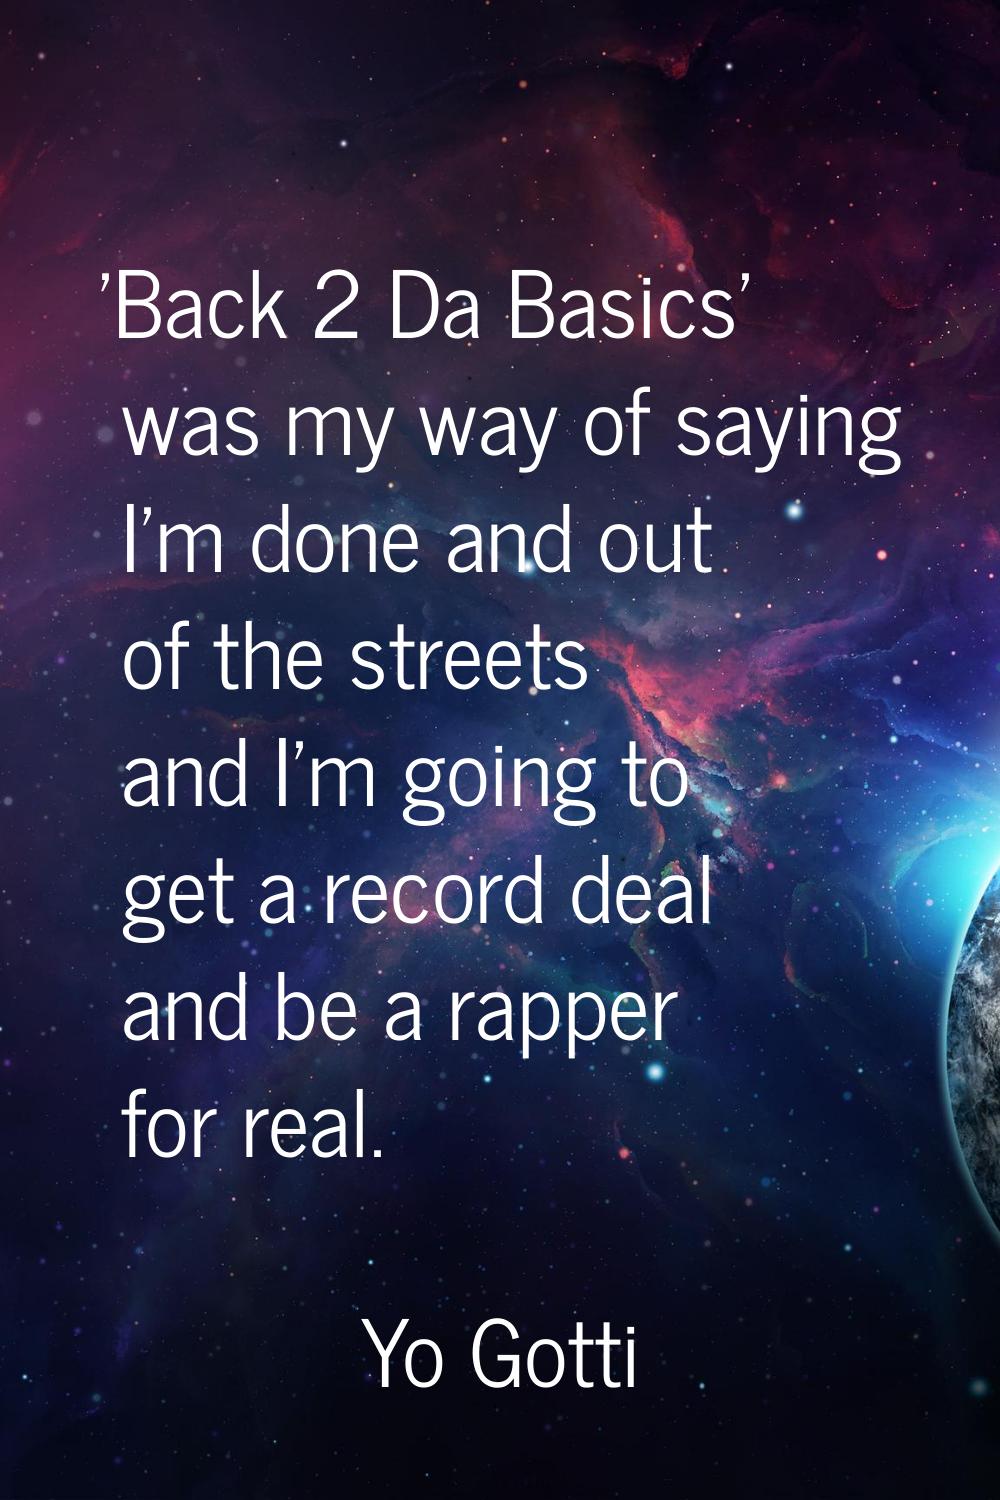 'Back 2 Da Basics' was my way of saying I'm done and out of the streets and I'm going to get a reco